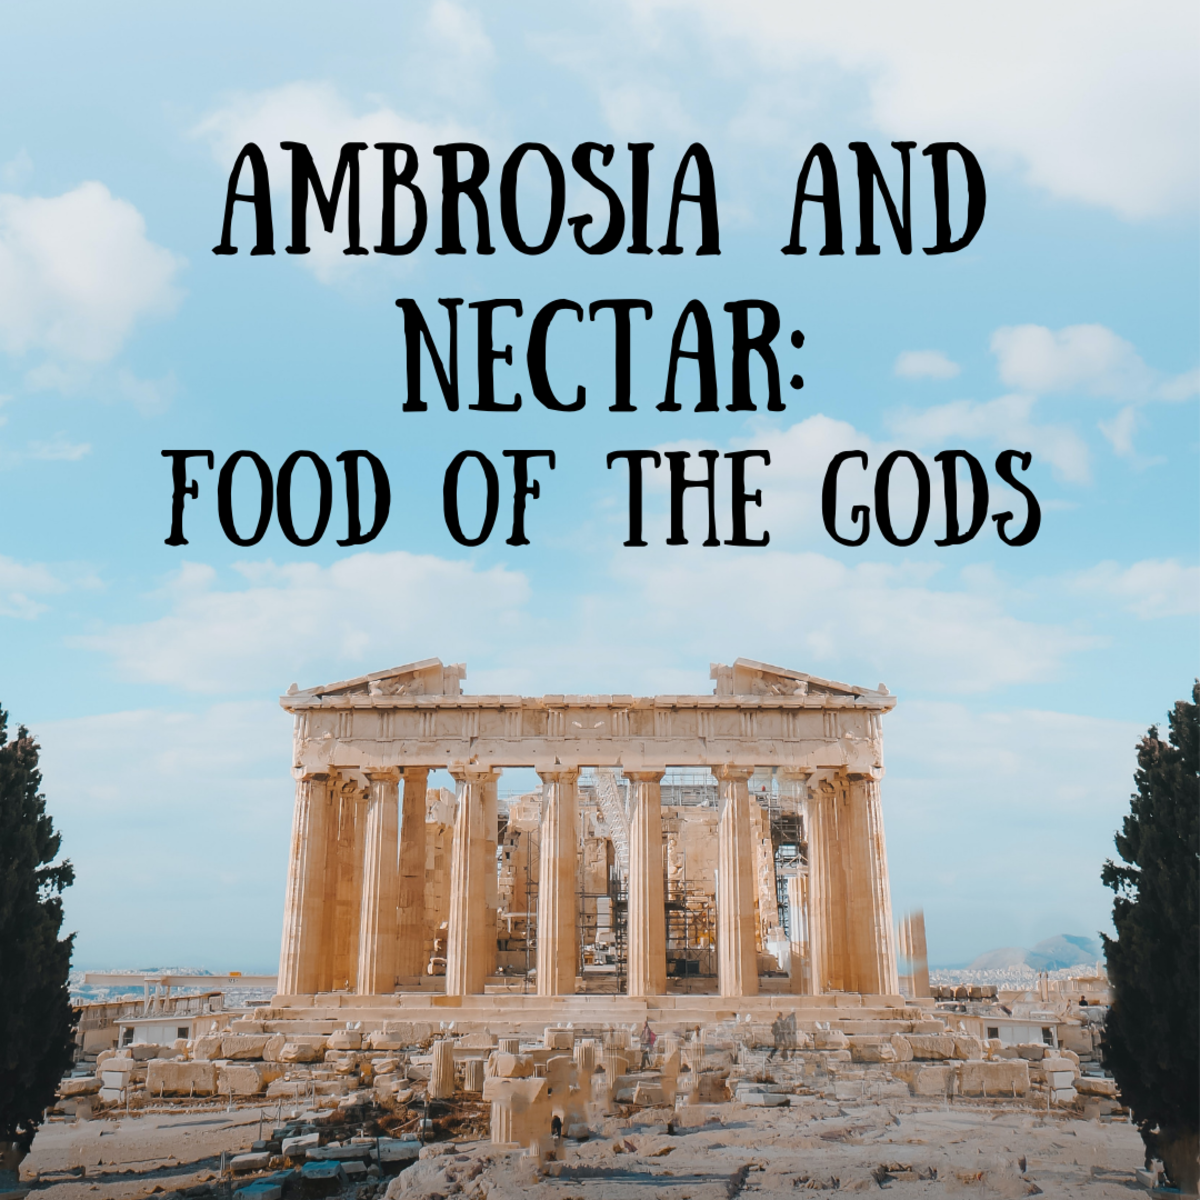 This article provides information on the substances of Ambrosia and Nectar as they appear in Greek mythology. Read on to learn more about these interesting substances.